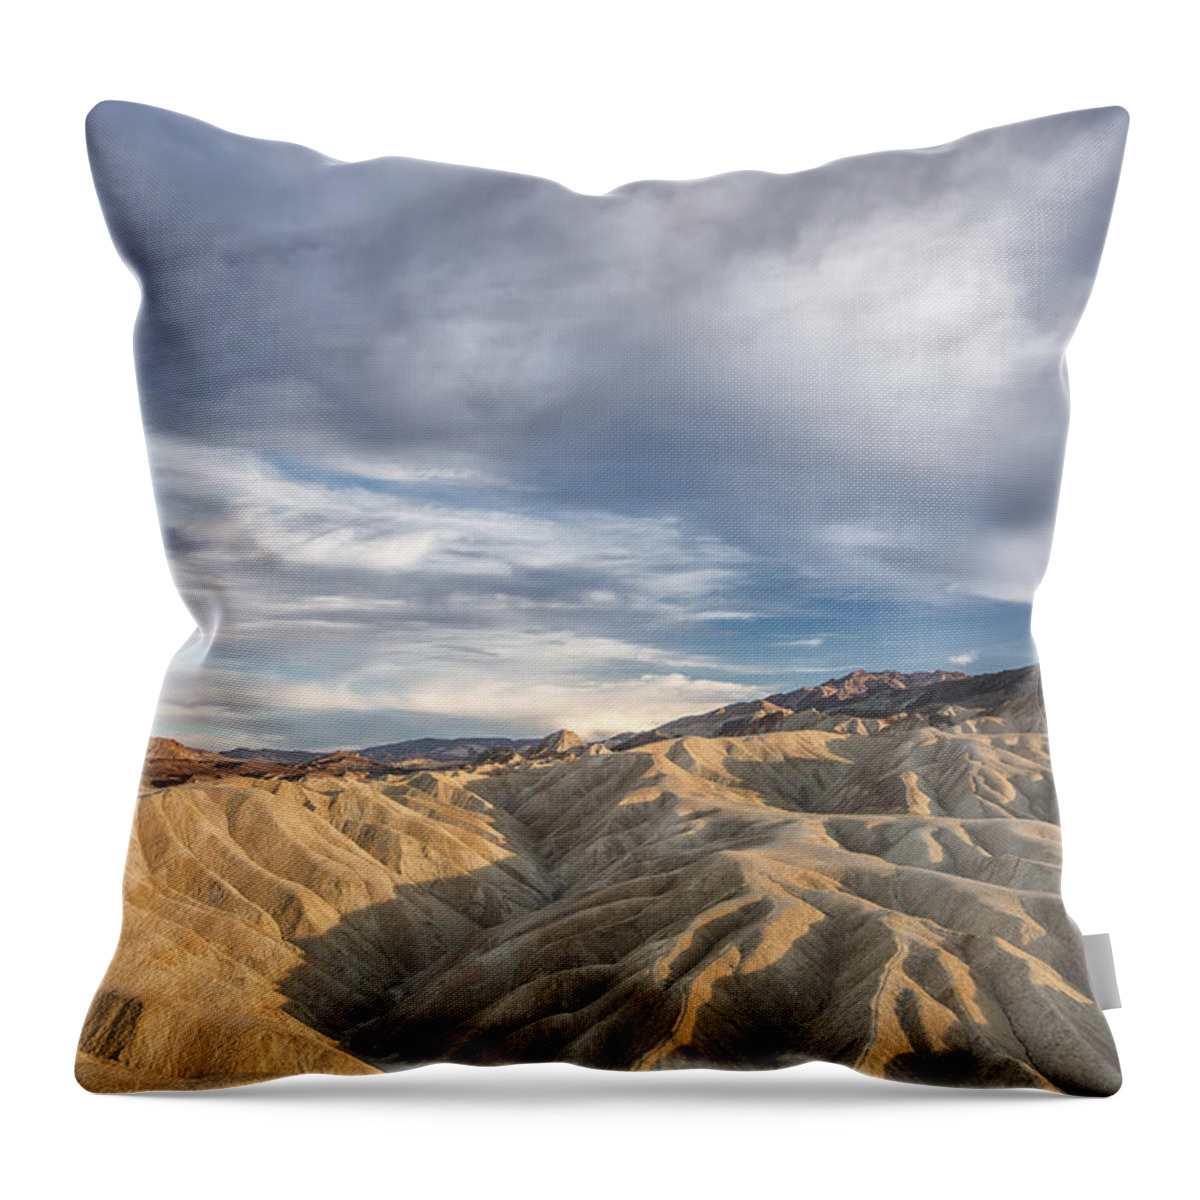 Horizontal Throw Pillow featuring the photograph Inter Twine by Jon Glaser